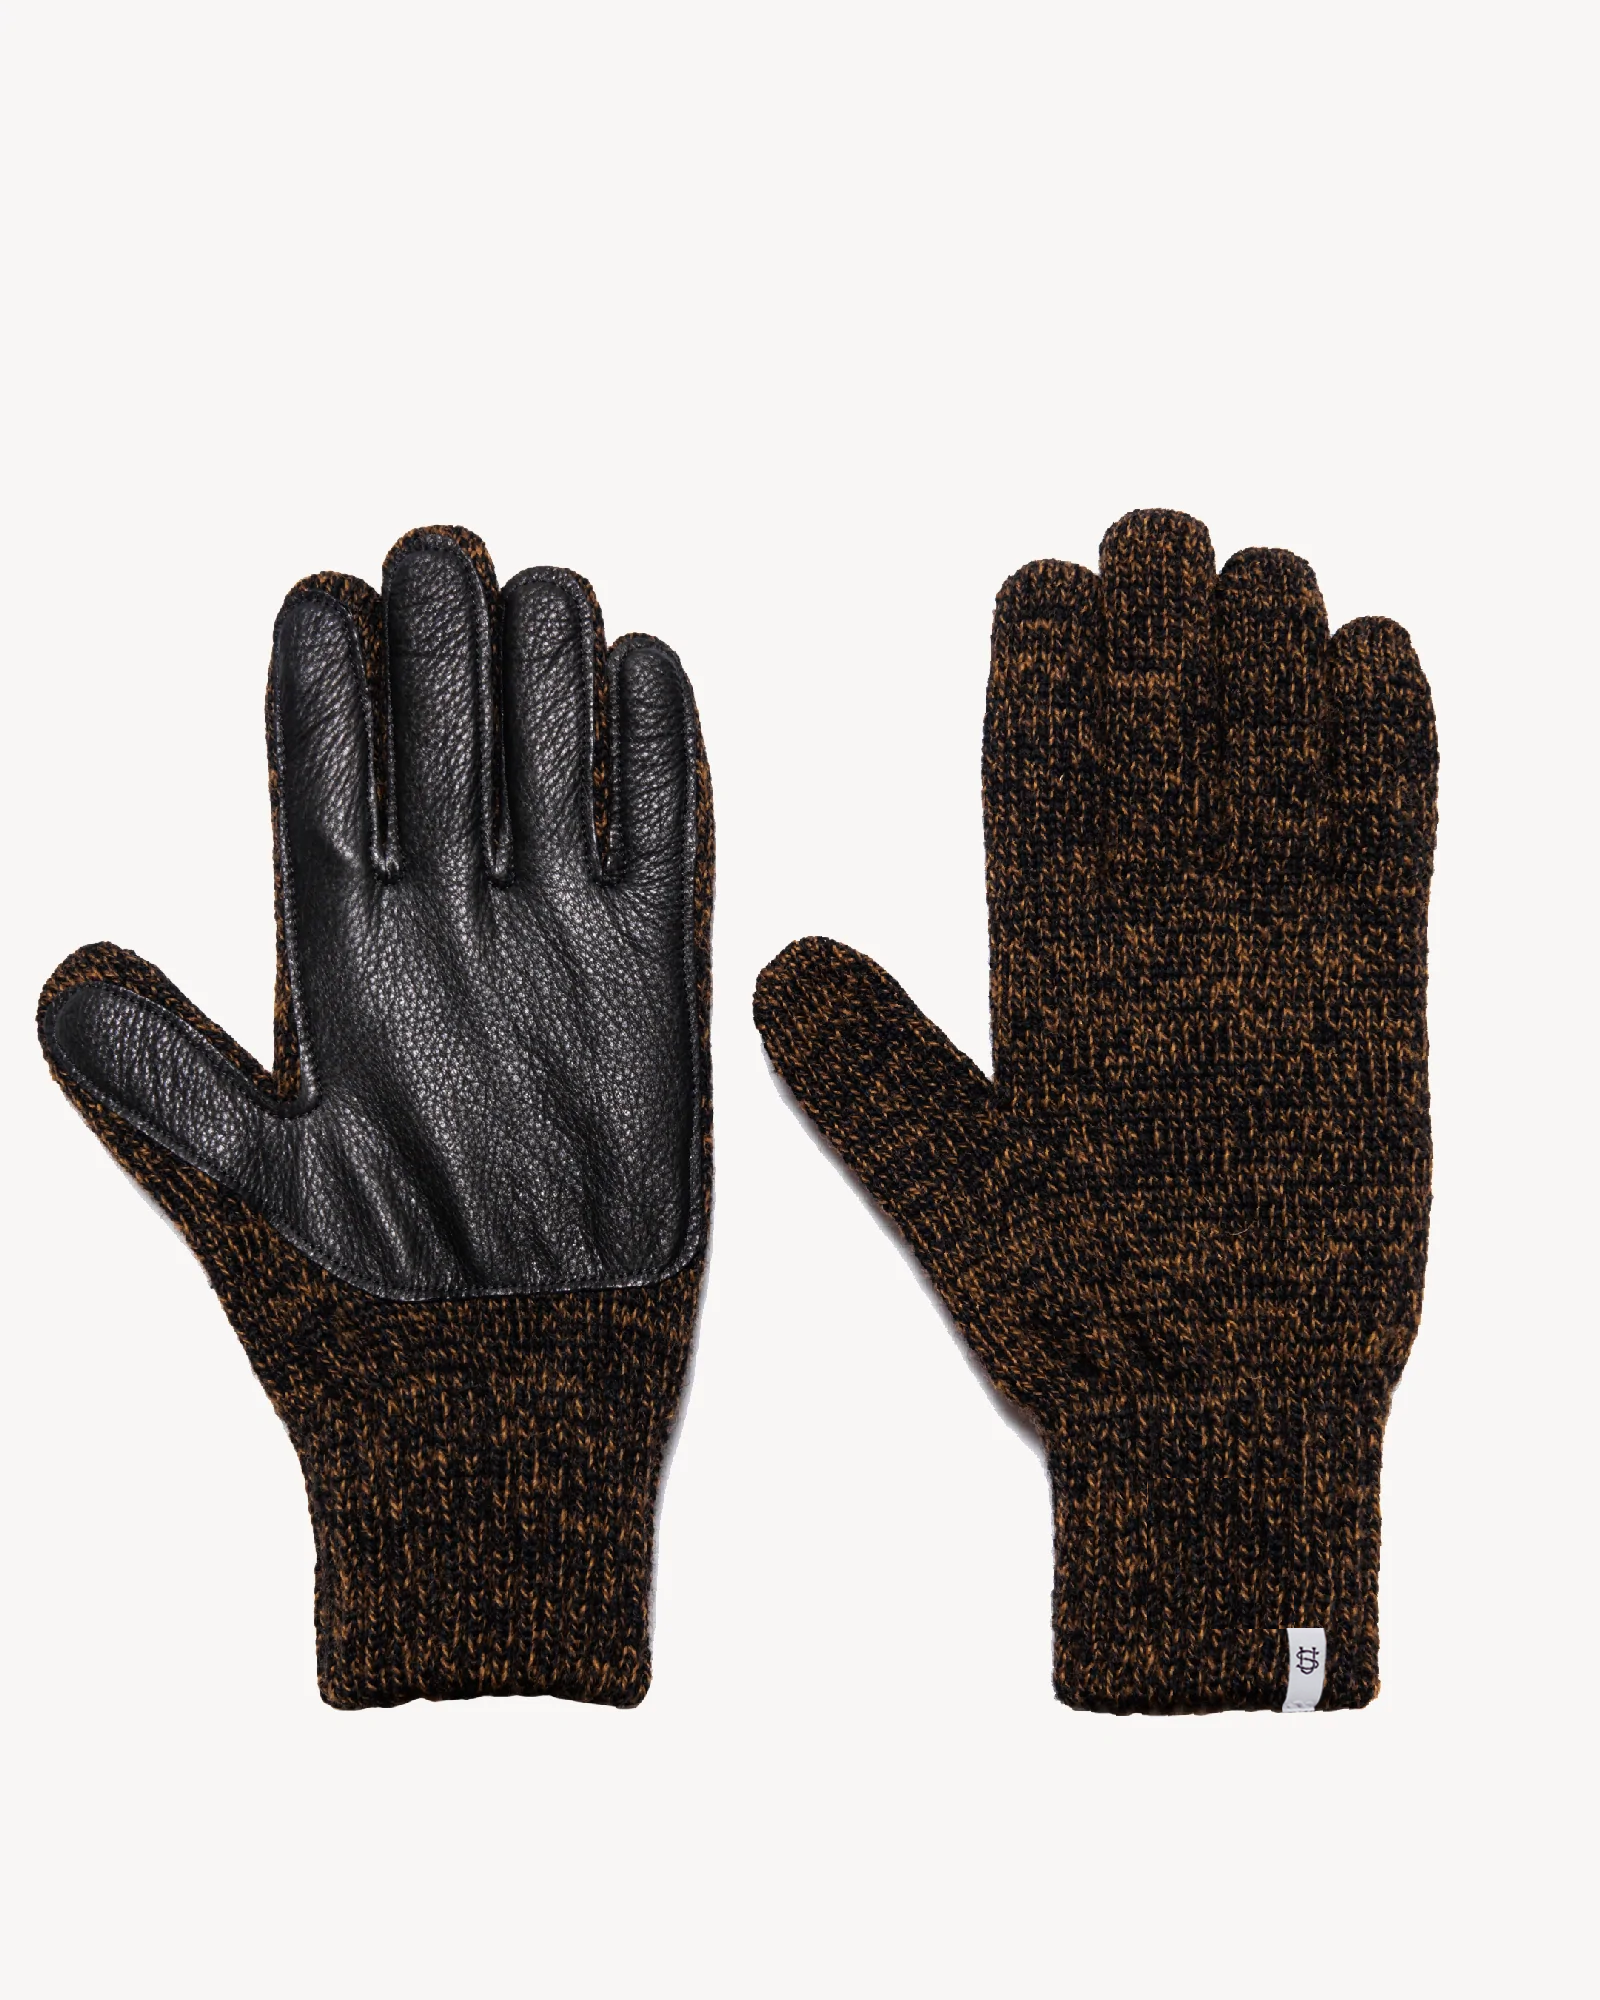 Rust Melange Ragg Wool Full Glove With Or Without Deer: No Deer / Large